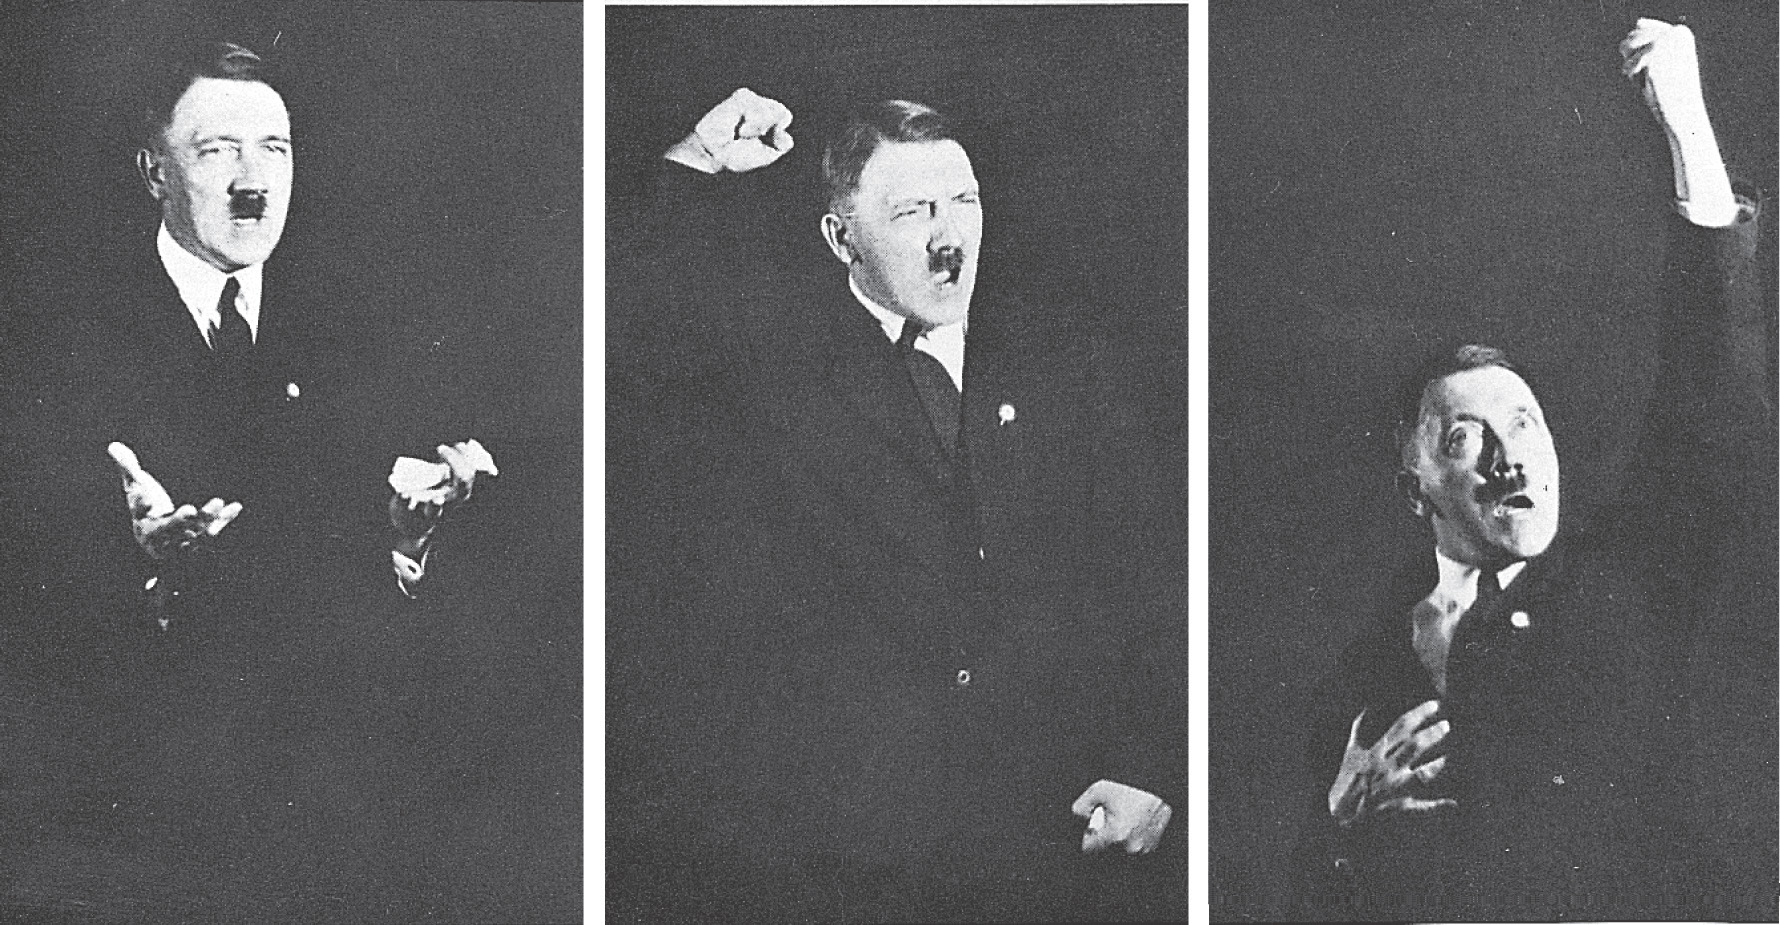 Three photos: Hitler reaches out his hands, shakes one fist, and lifts one fist into the air